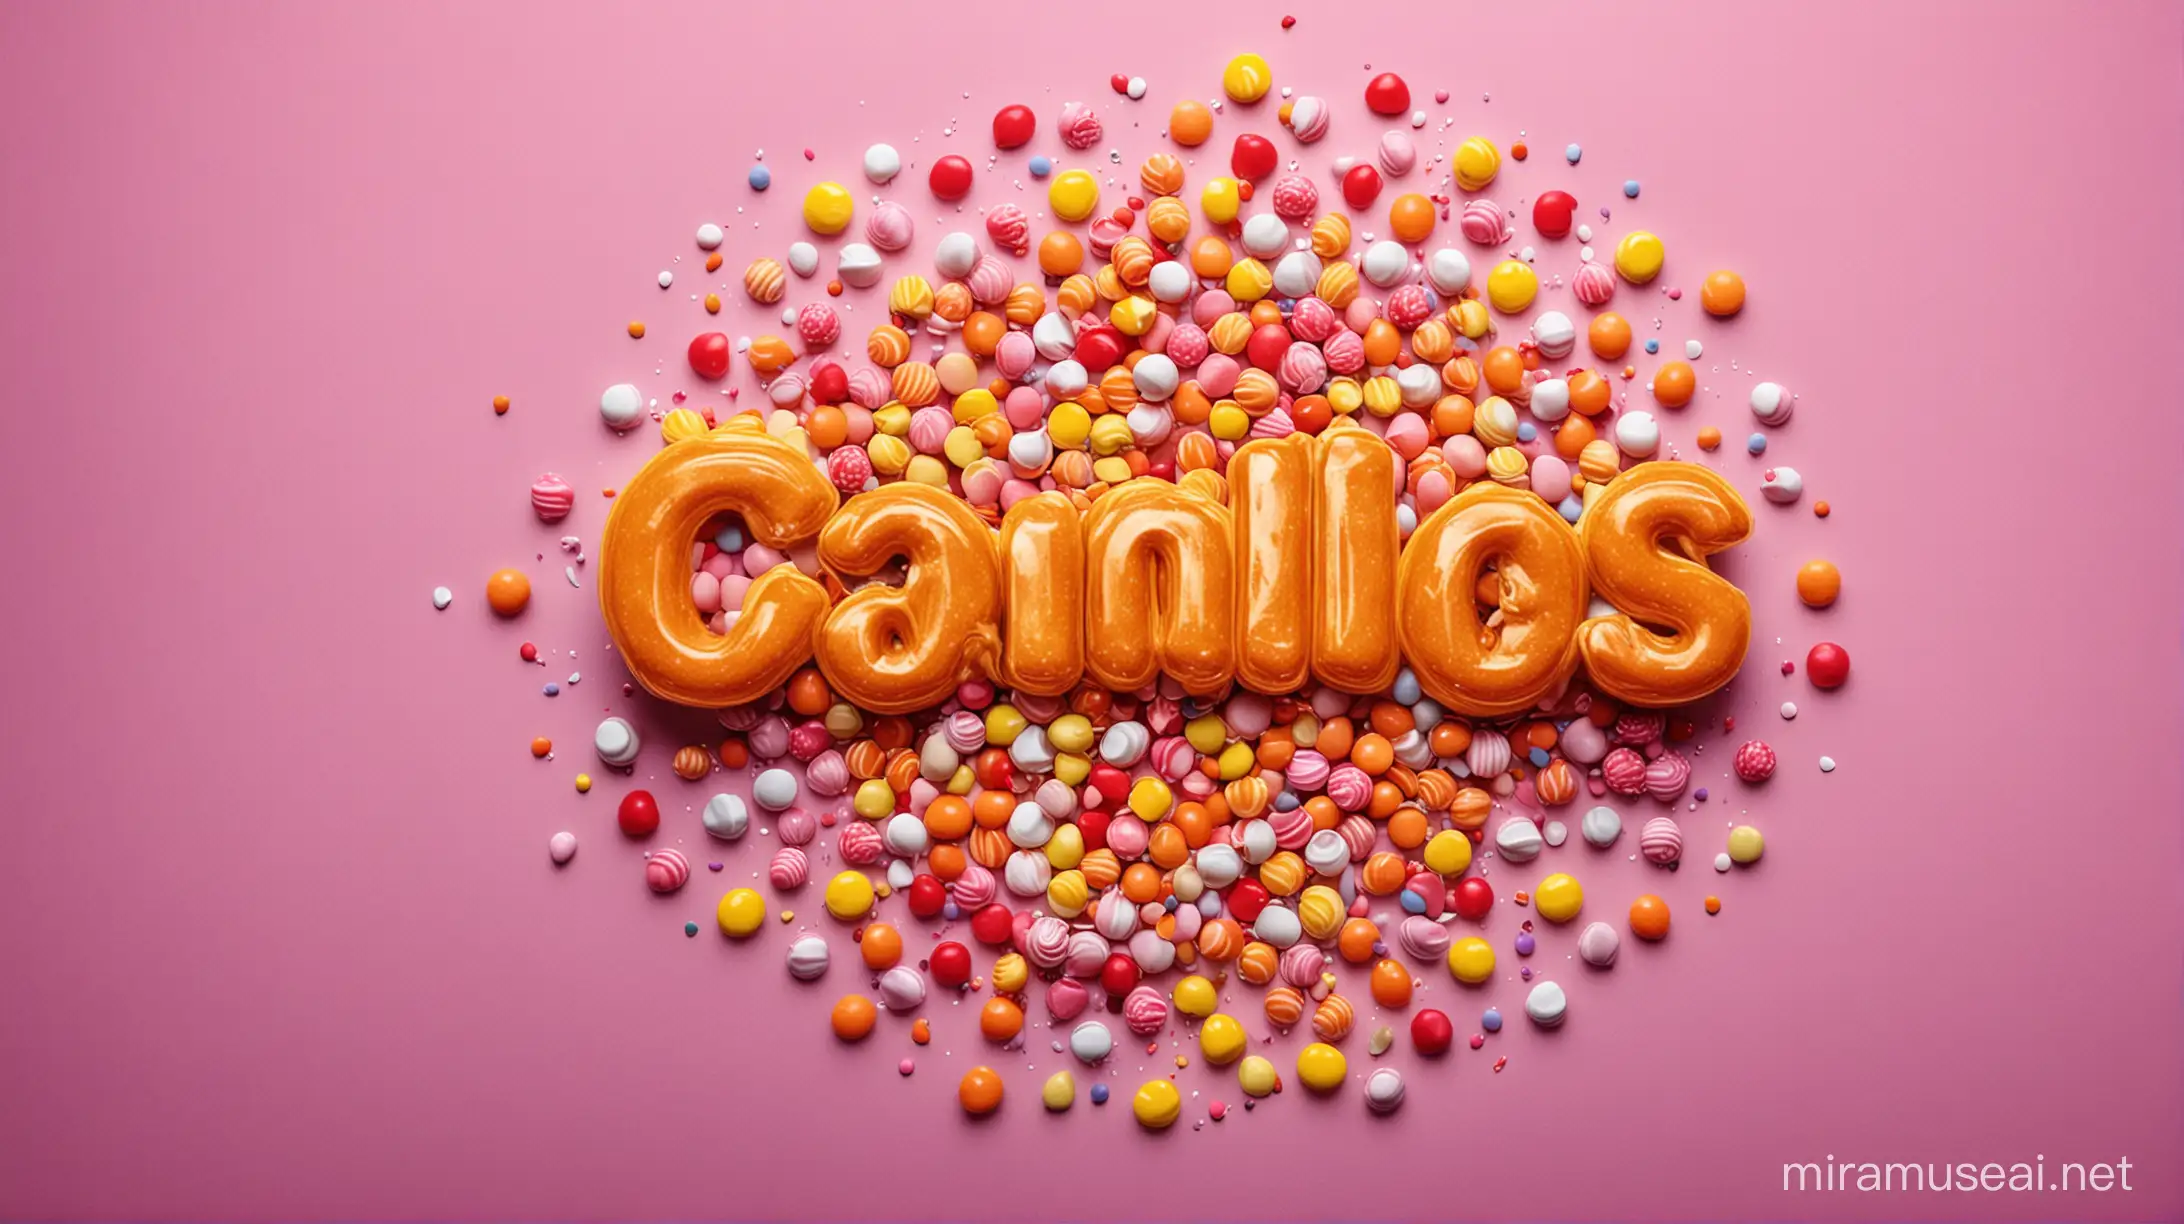 Create an innovative and original advertisement image for a candies. The background should be yellow and include various candies.